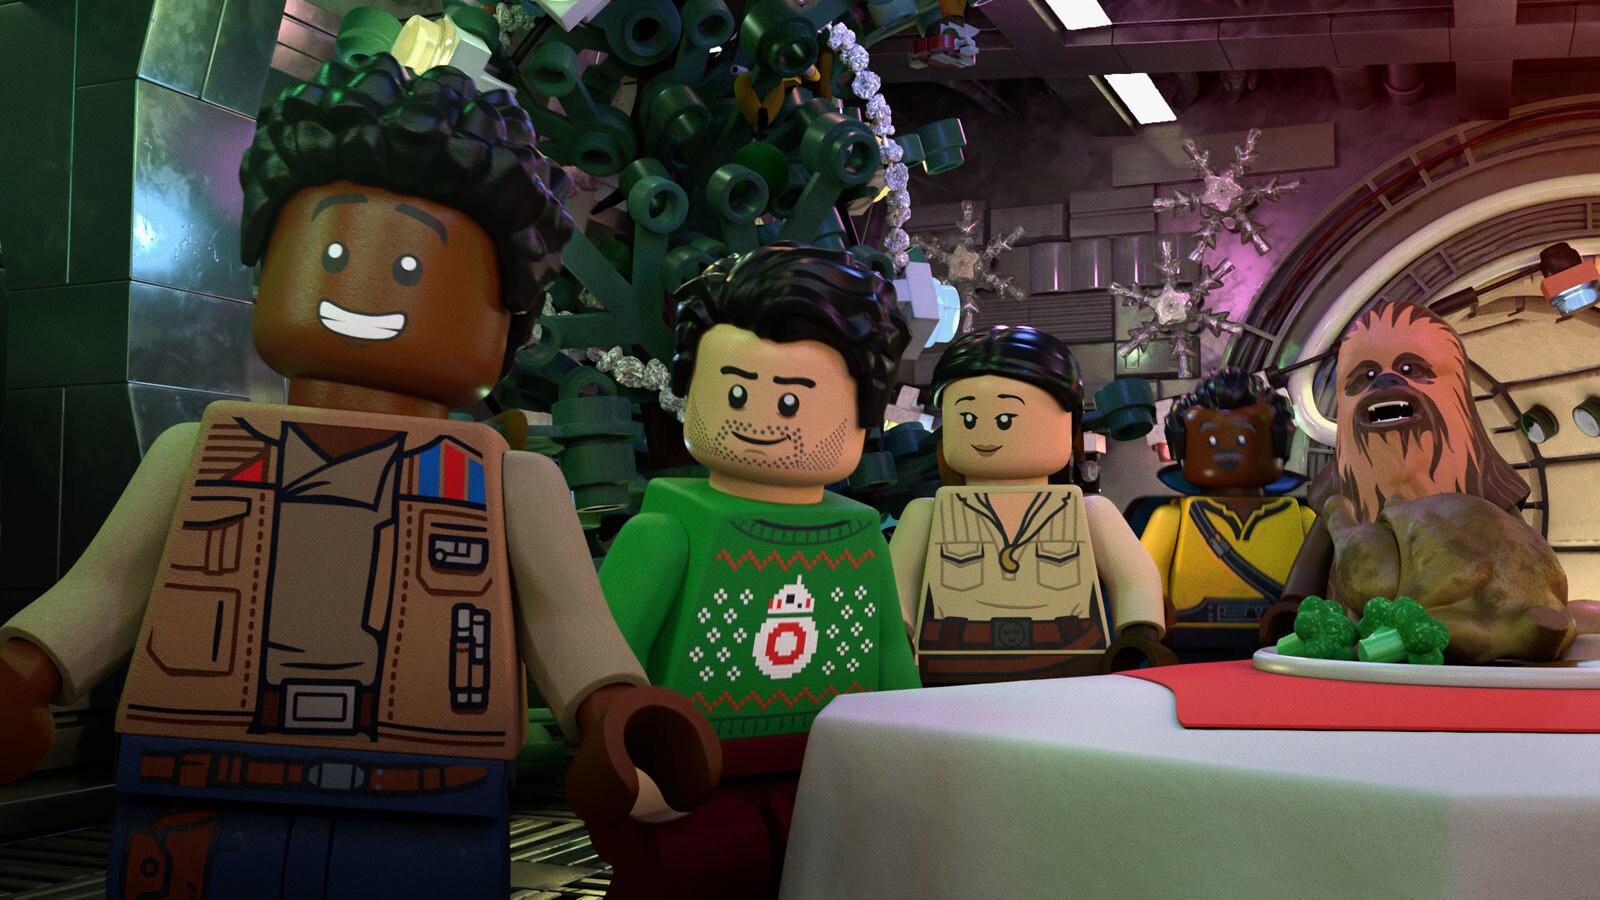 Finn, Poe, Rose, Lando, and Chewie in the LEGO Star Wars Holiday Special